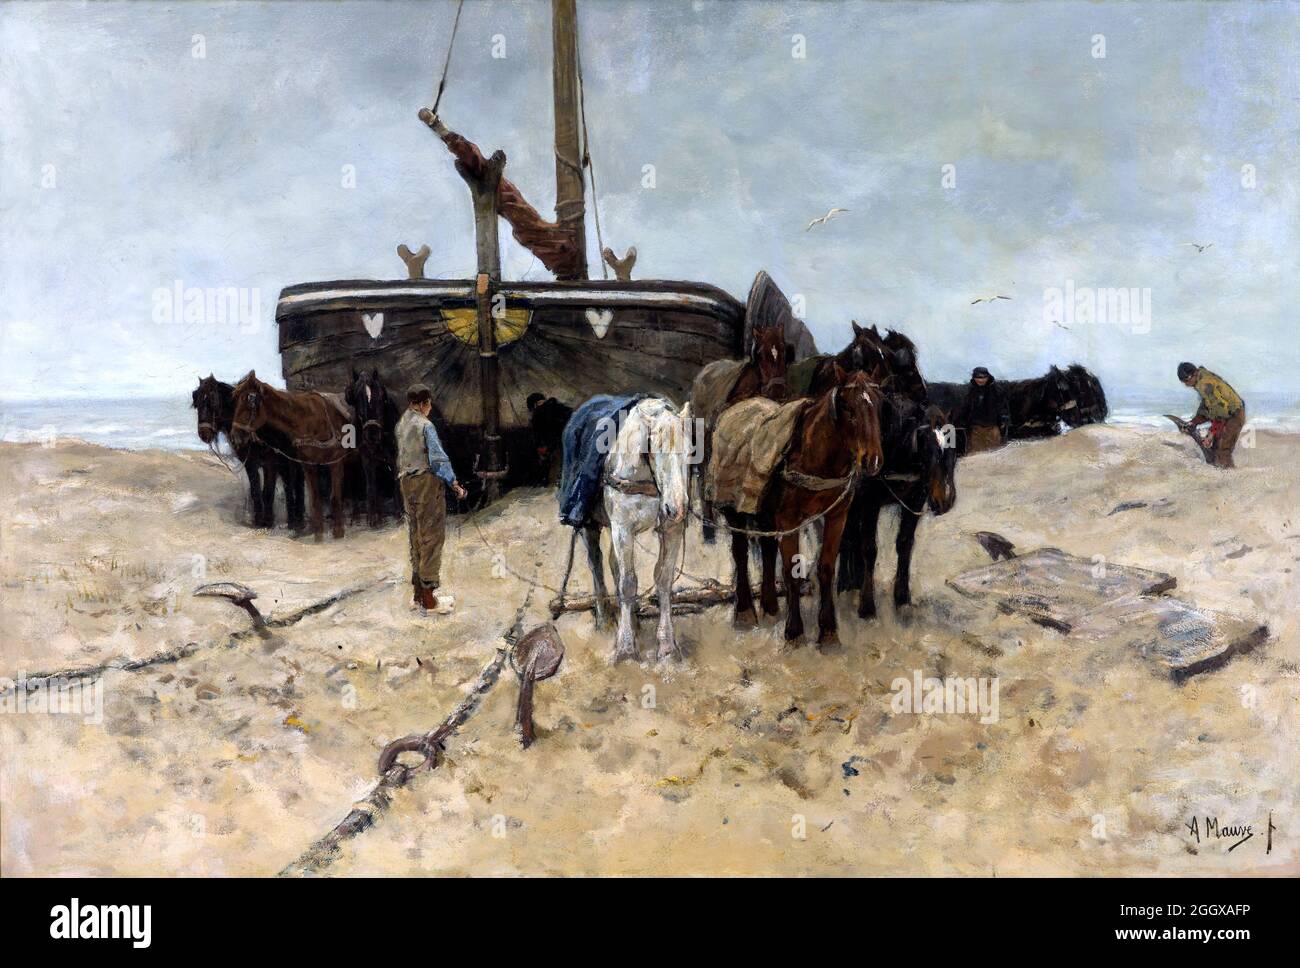 Fishing Boat on the Beach by Anton Mauve (1838-1888), oil on canvas, 1882 Stock Photo